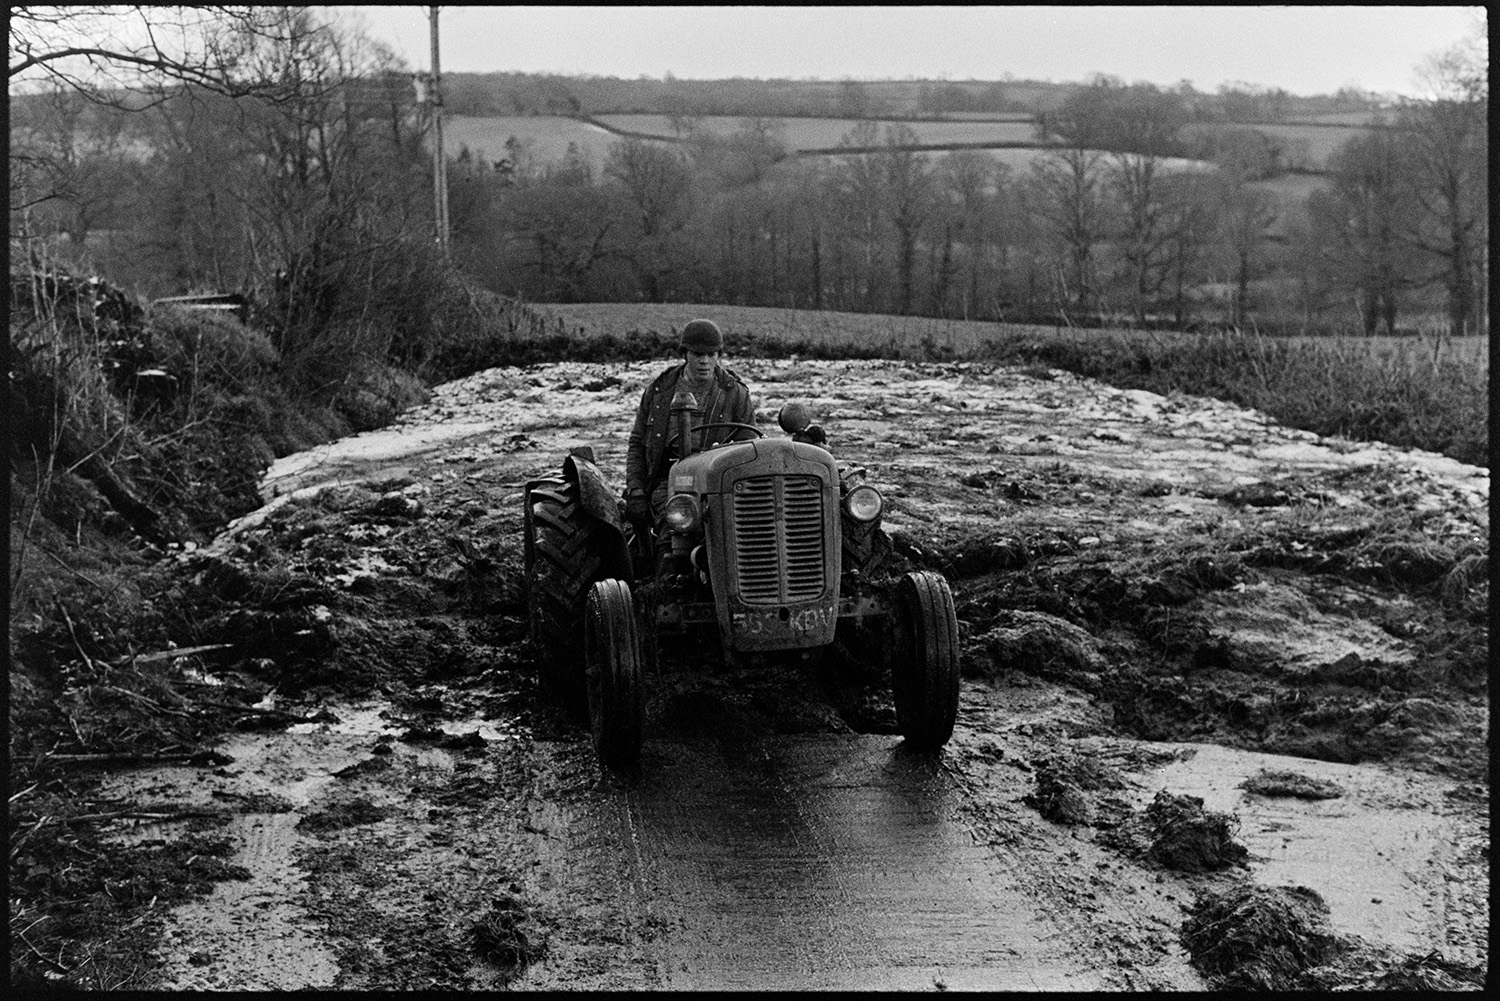 Tractor and scraper in mucky yard. 
[David Ward using a tractor and scraper to clear muck into a pile in a yard at Parsonage, Iddesleigh. Trees and fields can be seen in the background.]